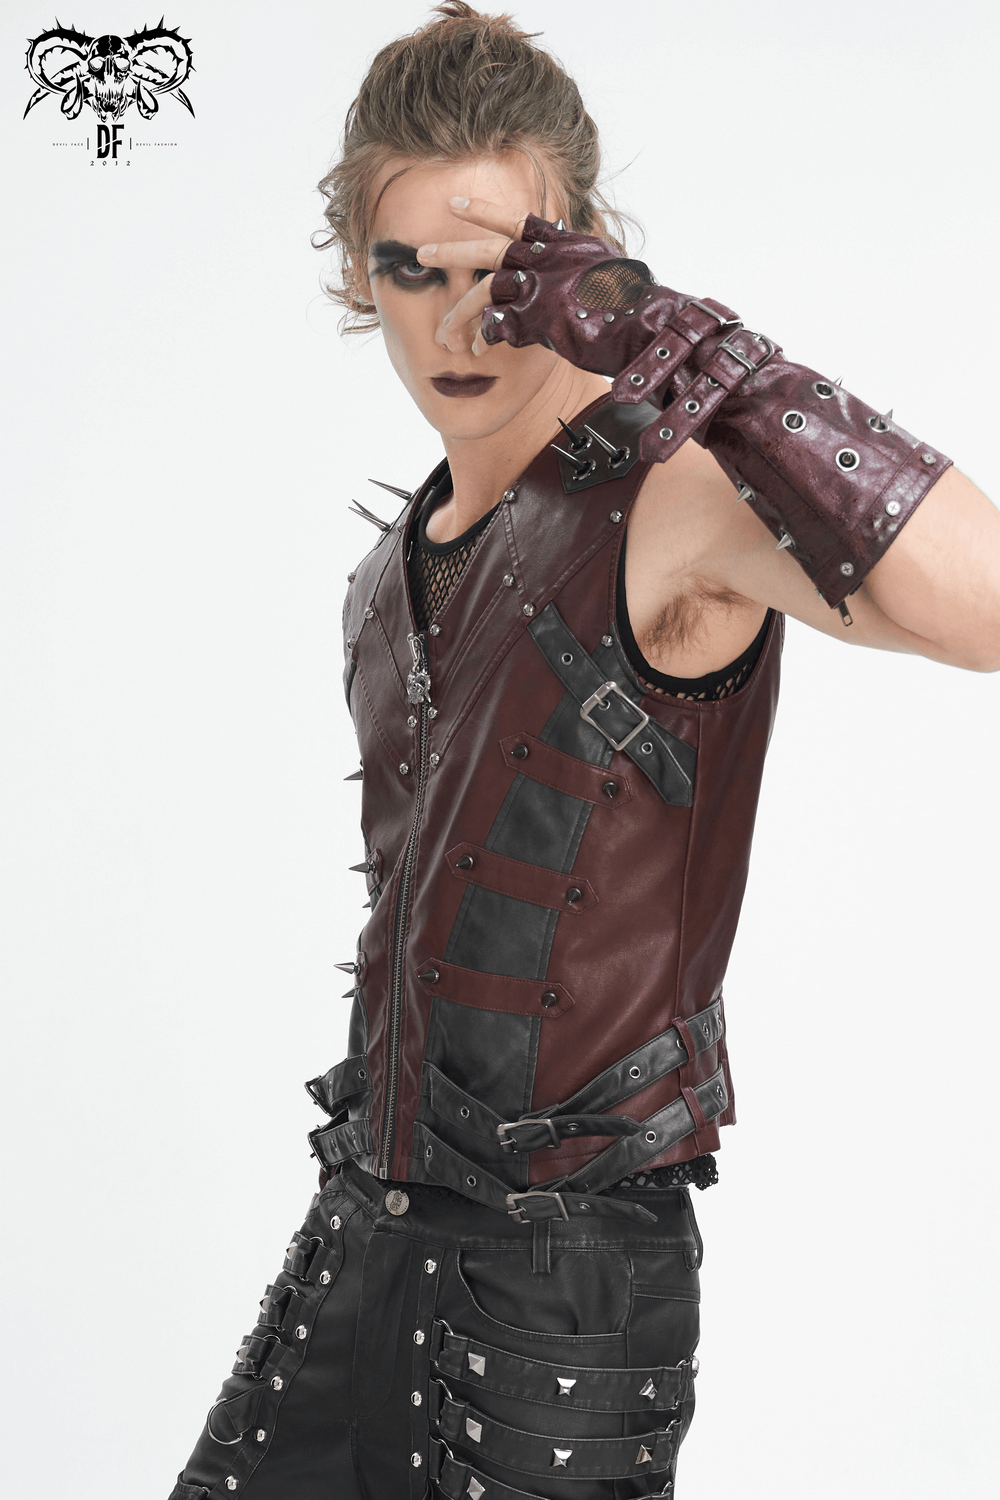 Men's Gothic Punk Studded Synthetic Leather Vest